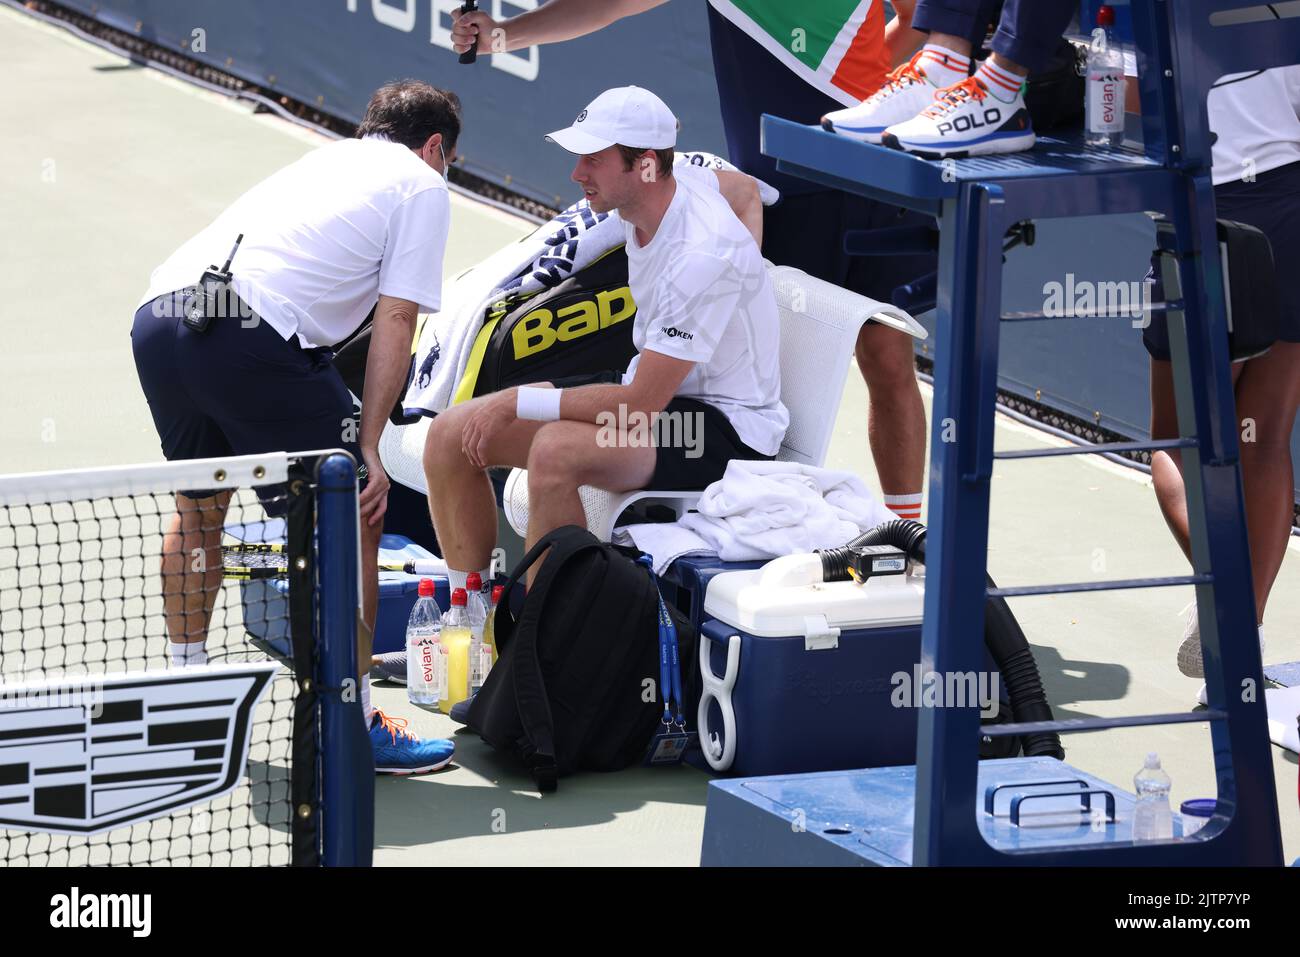 NEW YORK, NY - AUGUST 31: Botic van de Zandschulp of the Netherlands consults with the trainer during his match against Corentin Moutet of France at USTA Billie Jean King National Tennis Center on August 31, 2022 in New York City. (Photo by Adam Stoltman/BSR Agency) Stock Photo